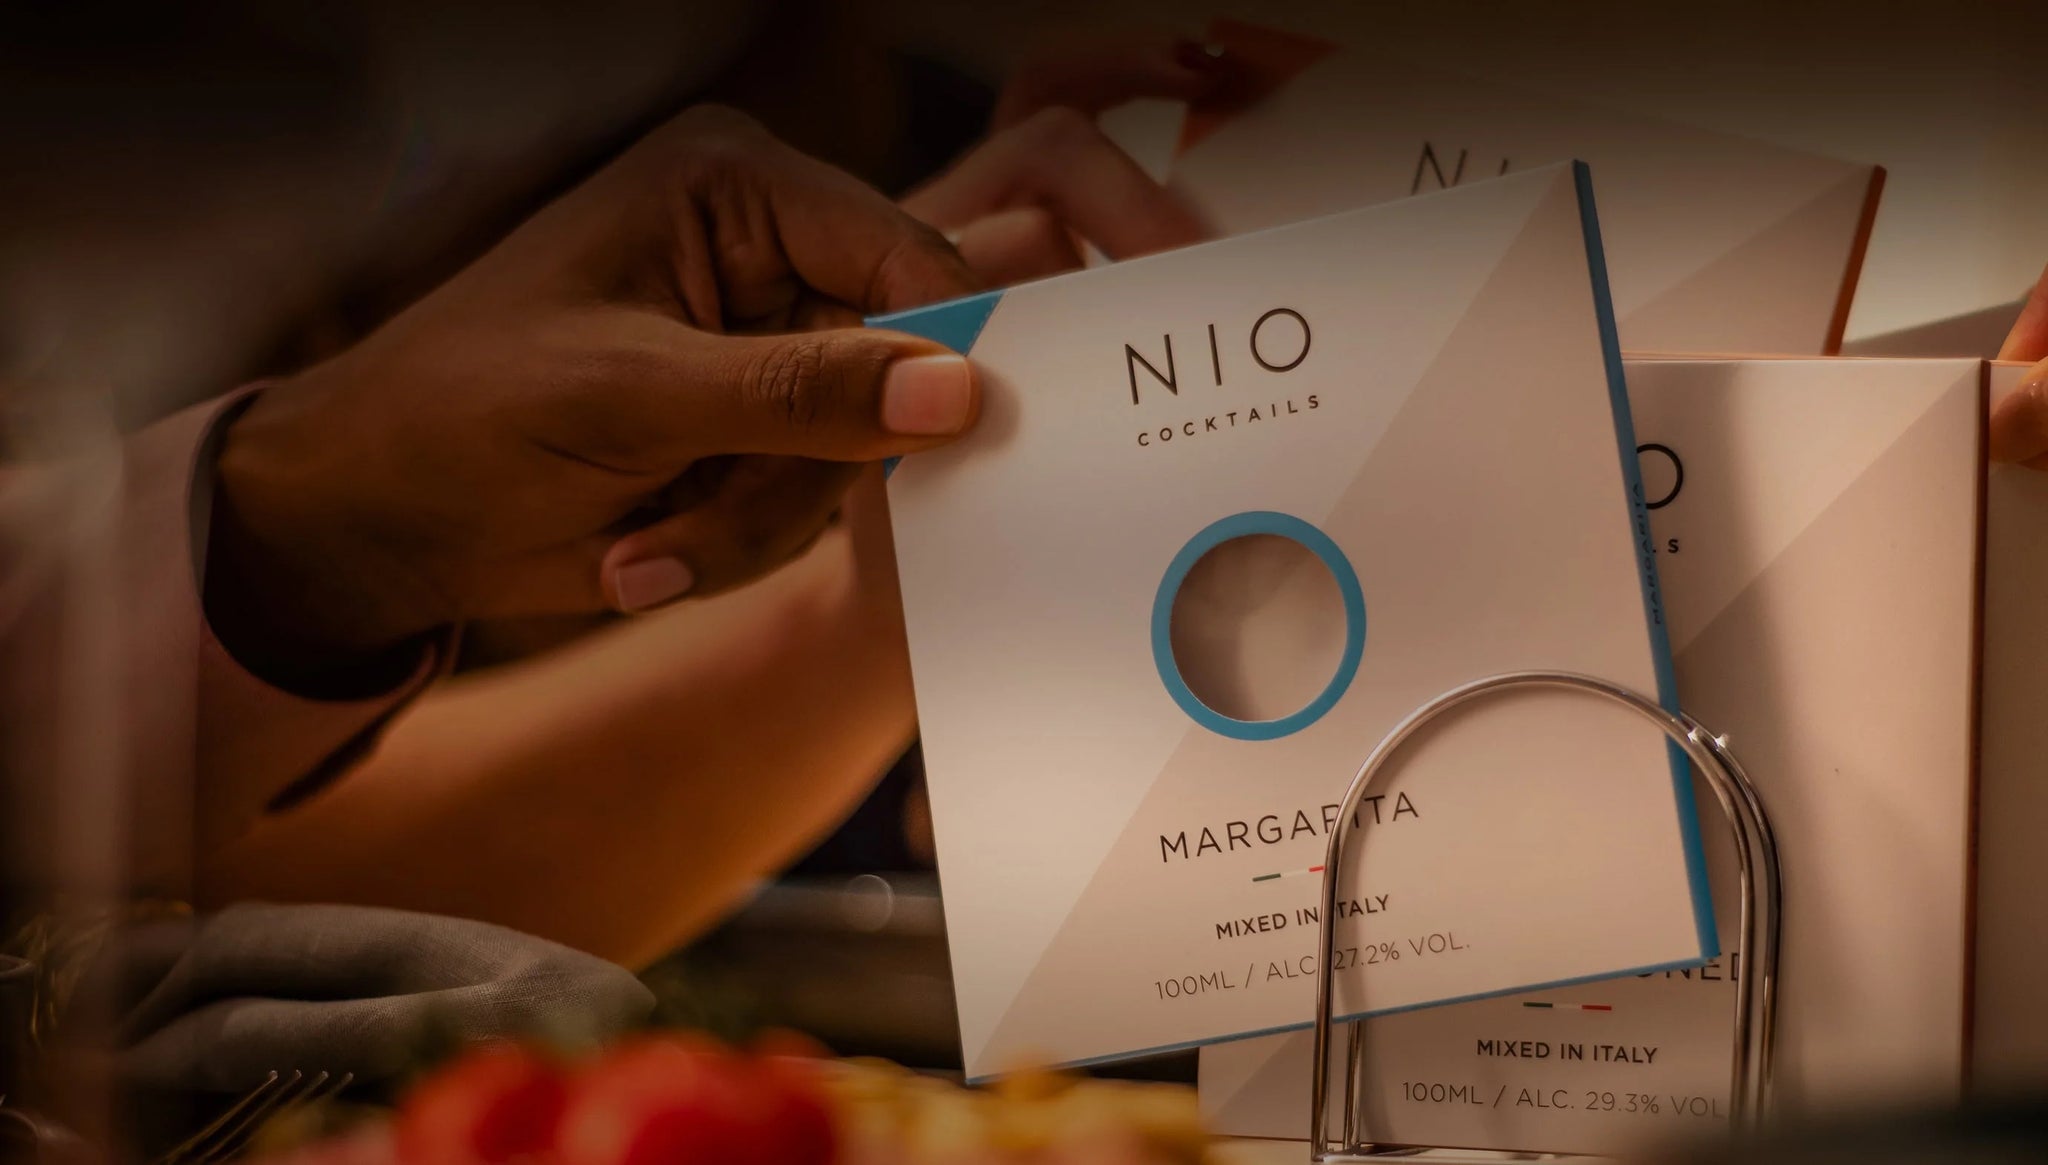 NIO Cocktails  Premixed Cocktails Delivered To You